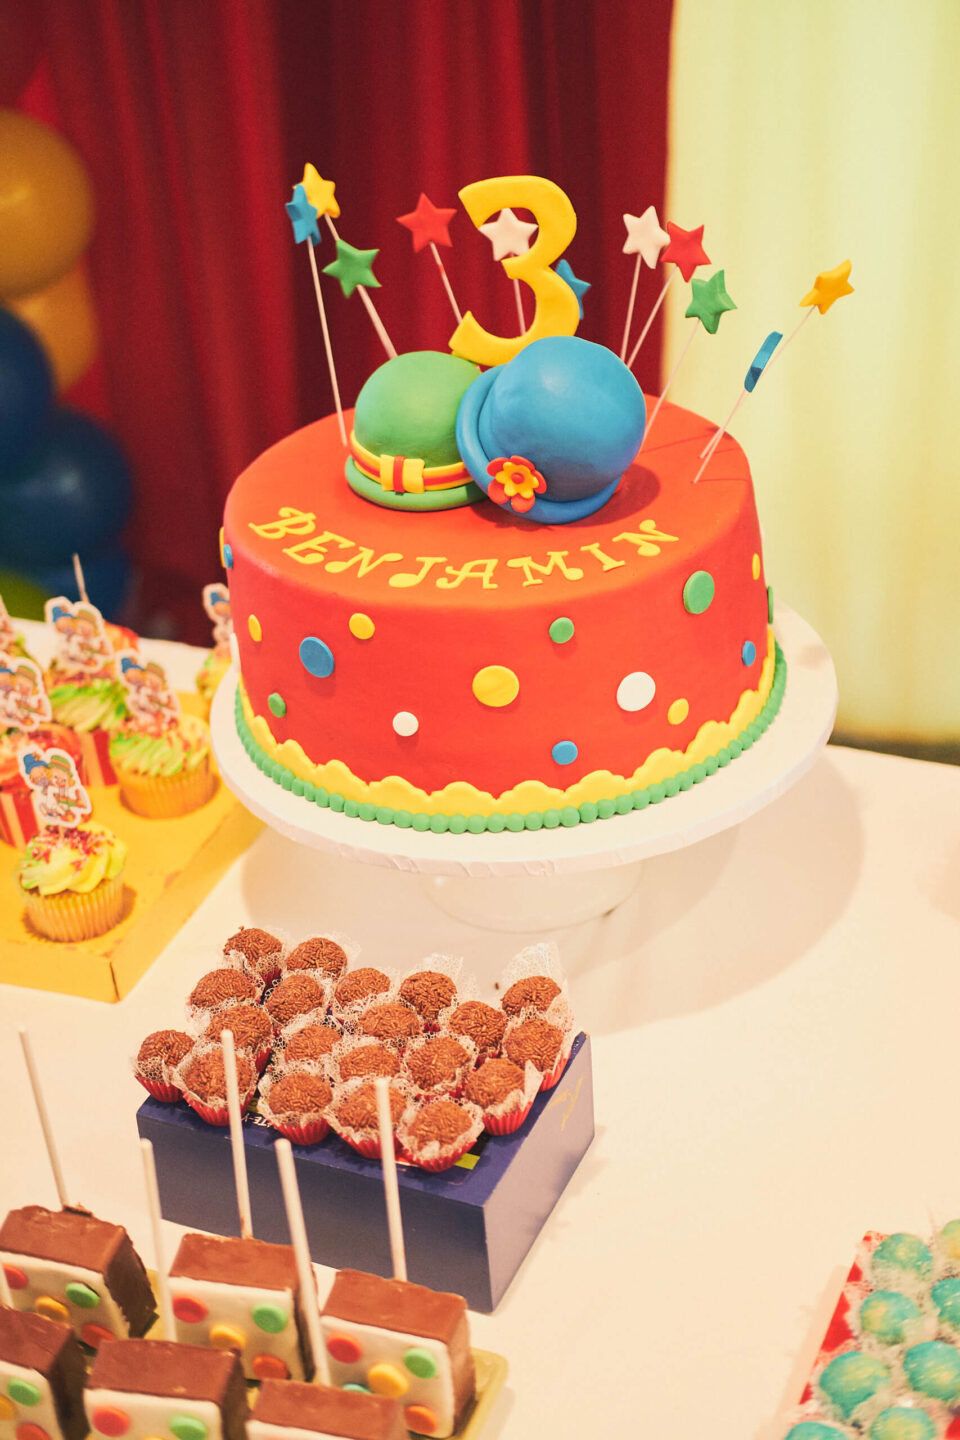 Benjamin's 3rd Birthday Party - Upper East Side, New York - Event Photography 